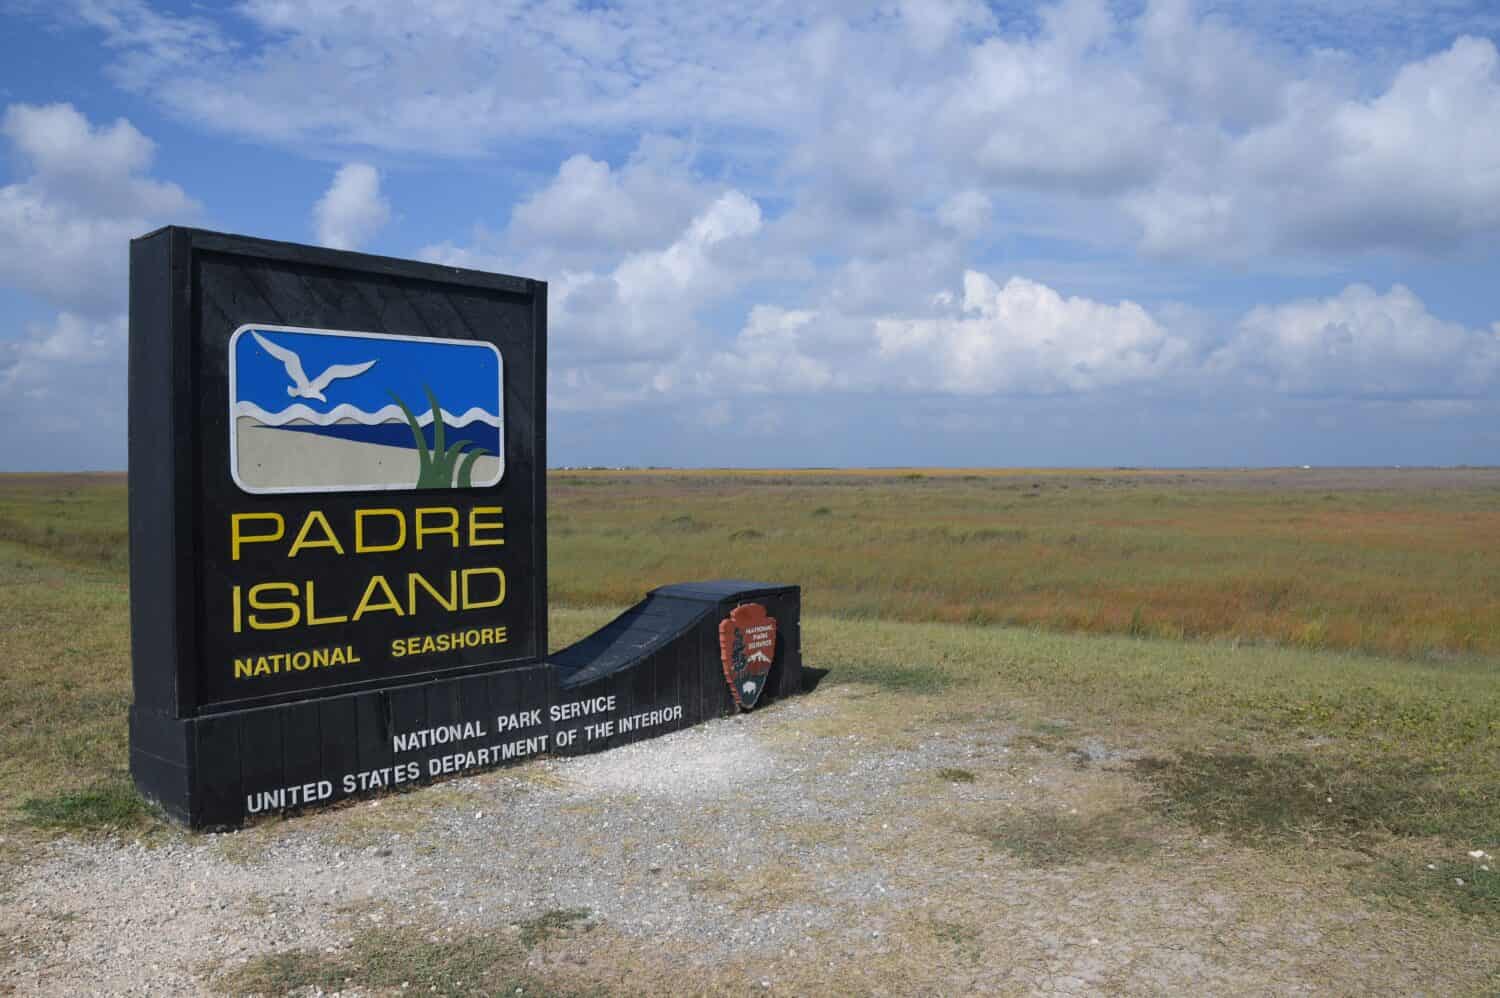 South Padre Island National Seashore sign located at the north entrance. South Padre Island, Corpus Christi, Texas